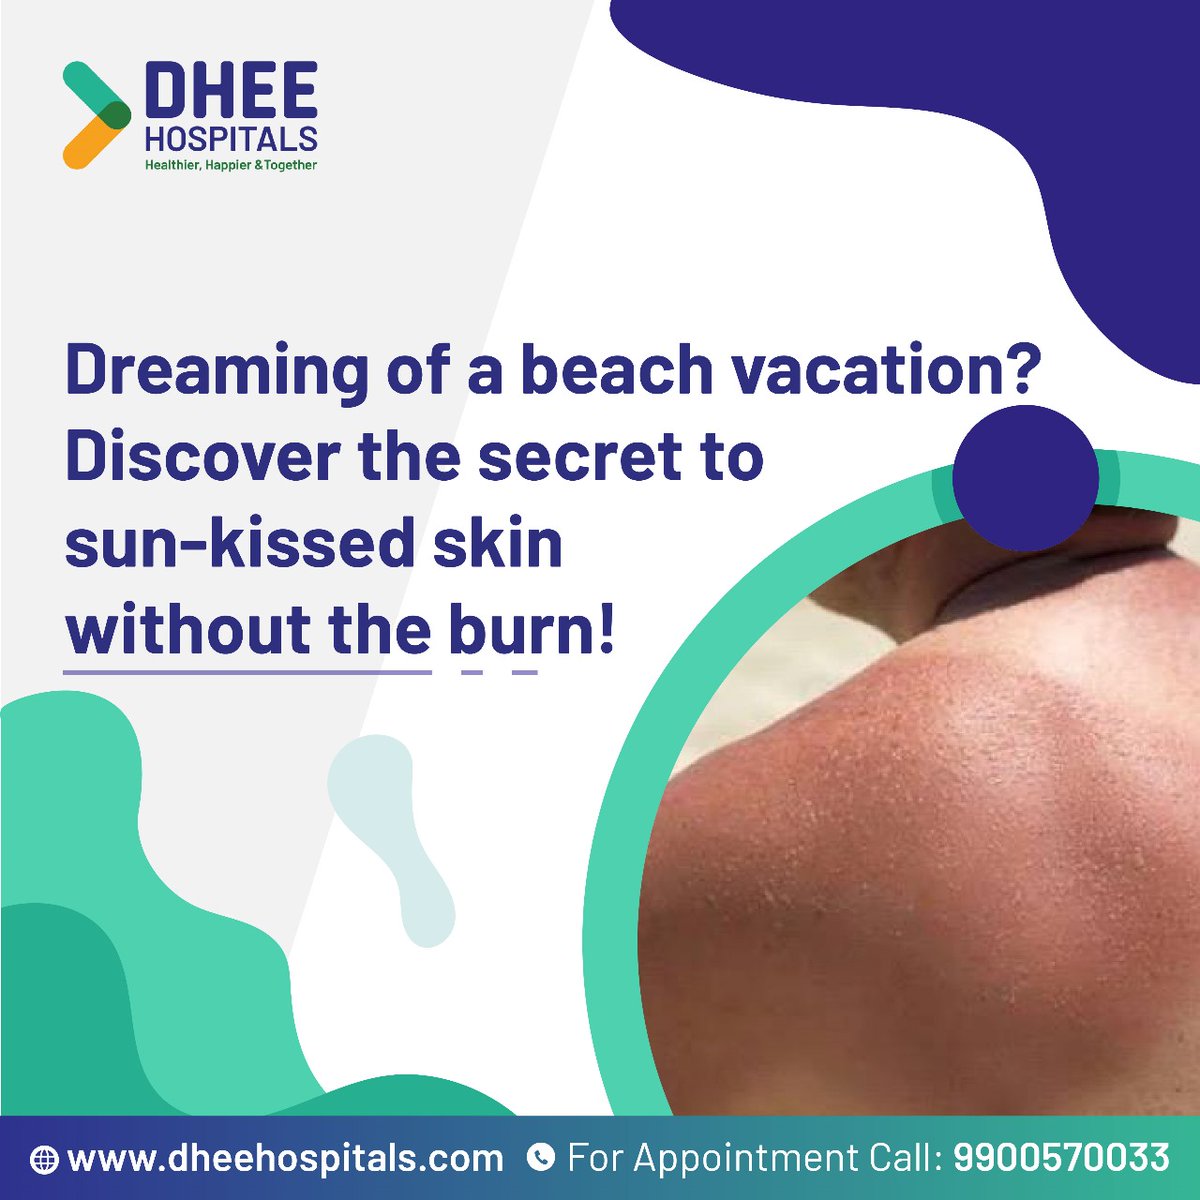 Embrace summer with sun-kissed skin! Choose the right sunscreen and cover up wisely. Meet Dr. Archana Lakshman for expert dermatology advice. Book now!
#SummerSkinCare #SunProtection #HealthySkin #Dermatology #ConsultADermatologist #Dheehospitals #nammadhee